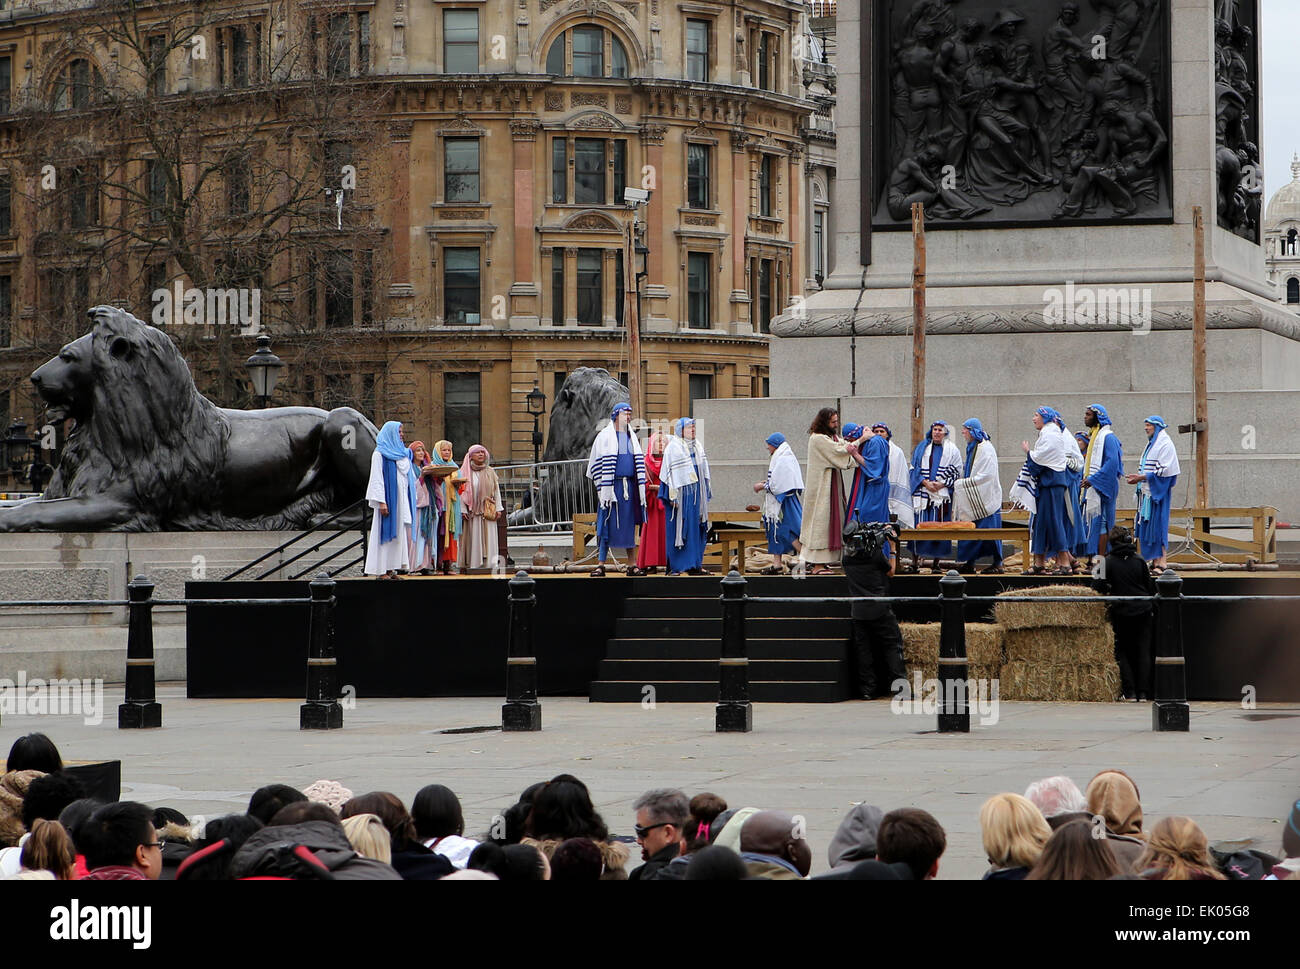 London, Britain. 3rd Apr, 2015. Actors perform 'The Passion of Jesus' marking Good Friday in Trafalgar Square in London, Britain, on April 3, 2015. Good Friday is a Christian holiday before Easter Sunday, which commemorates the crucifixion of Jesus Christ on the cross. The Wintershall's theatrical production of 'The Passion of Jesus' includes a cast of 100 actors, horses, a donkey and authentic costumes of Roman soldiers in the 12th Legion of the Roman Army. Credit:  Han Yan/Xinhua/Alamy Live News Stock Photo